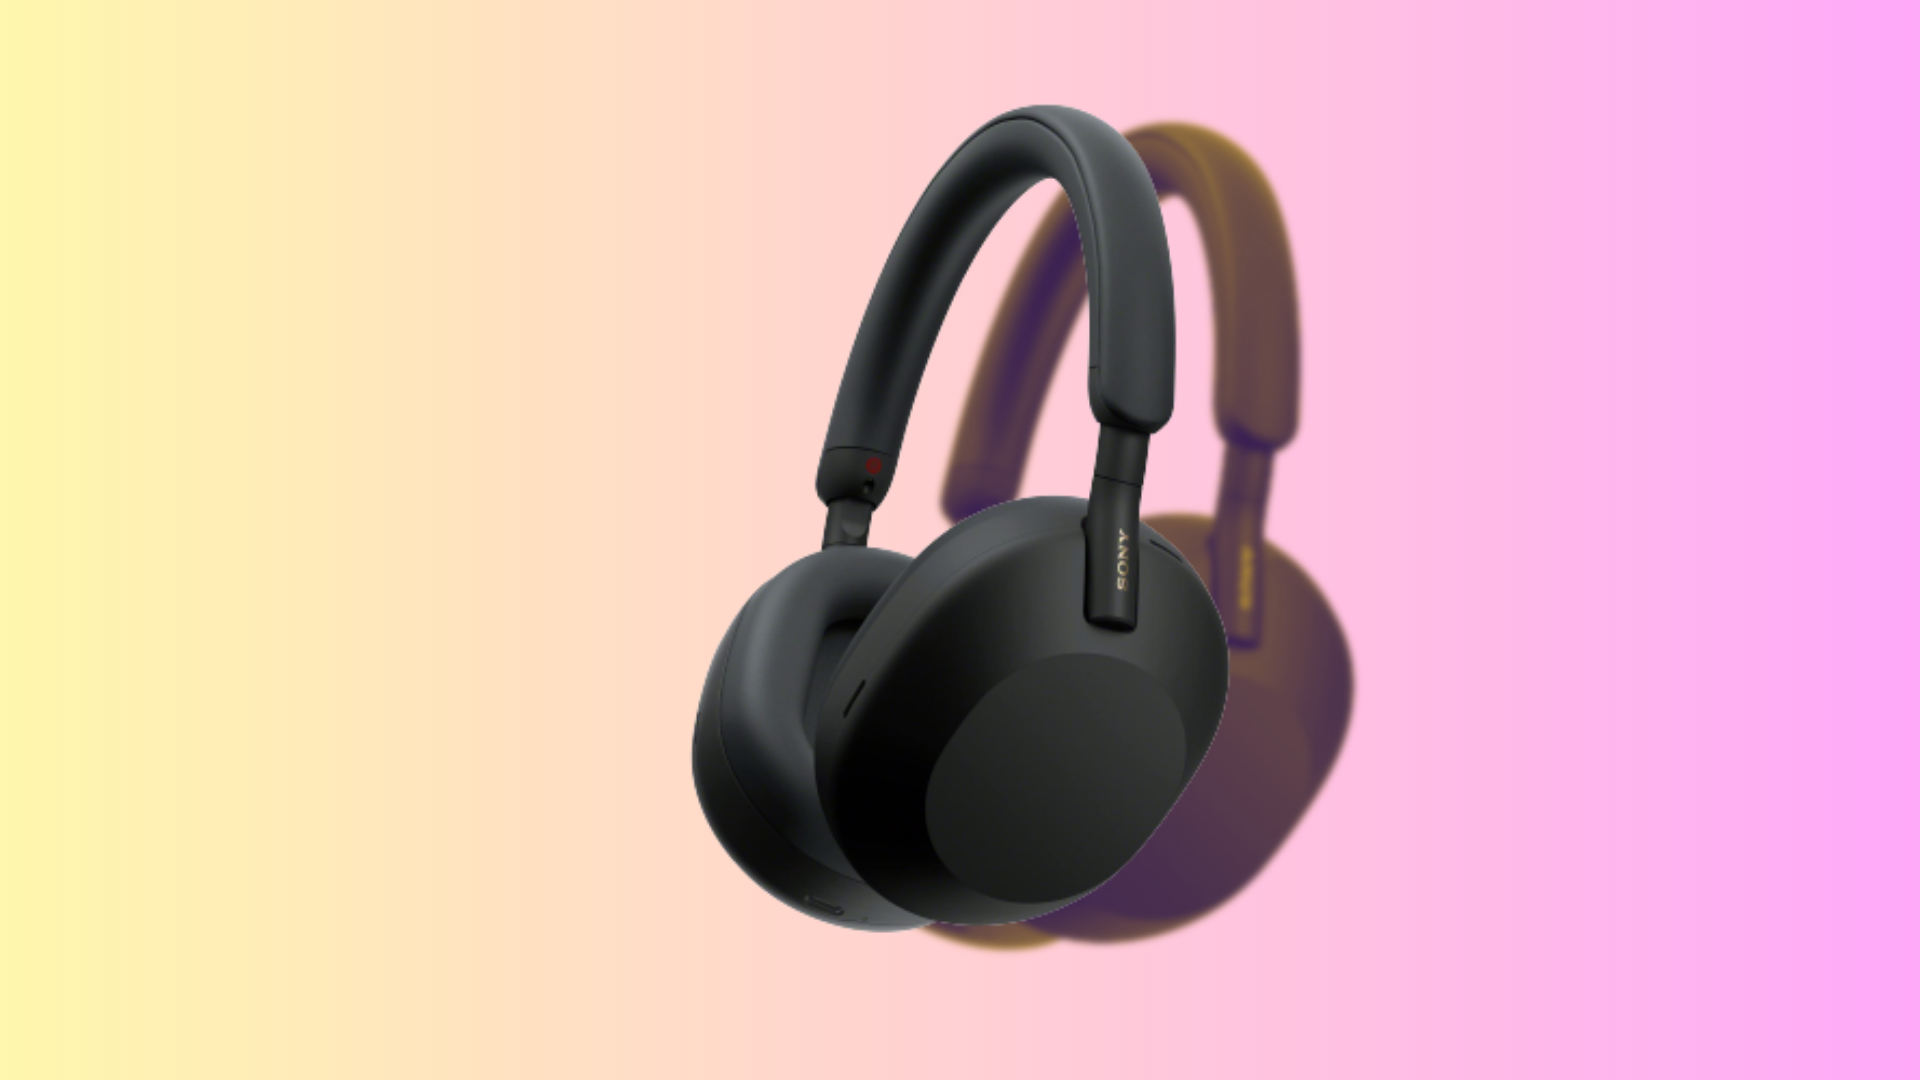 The Sony WH-1000XM5 headphones over a gradient and colorful background